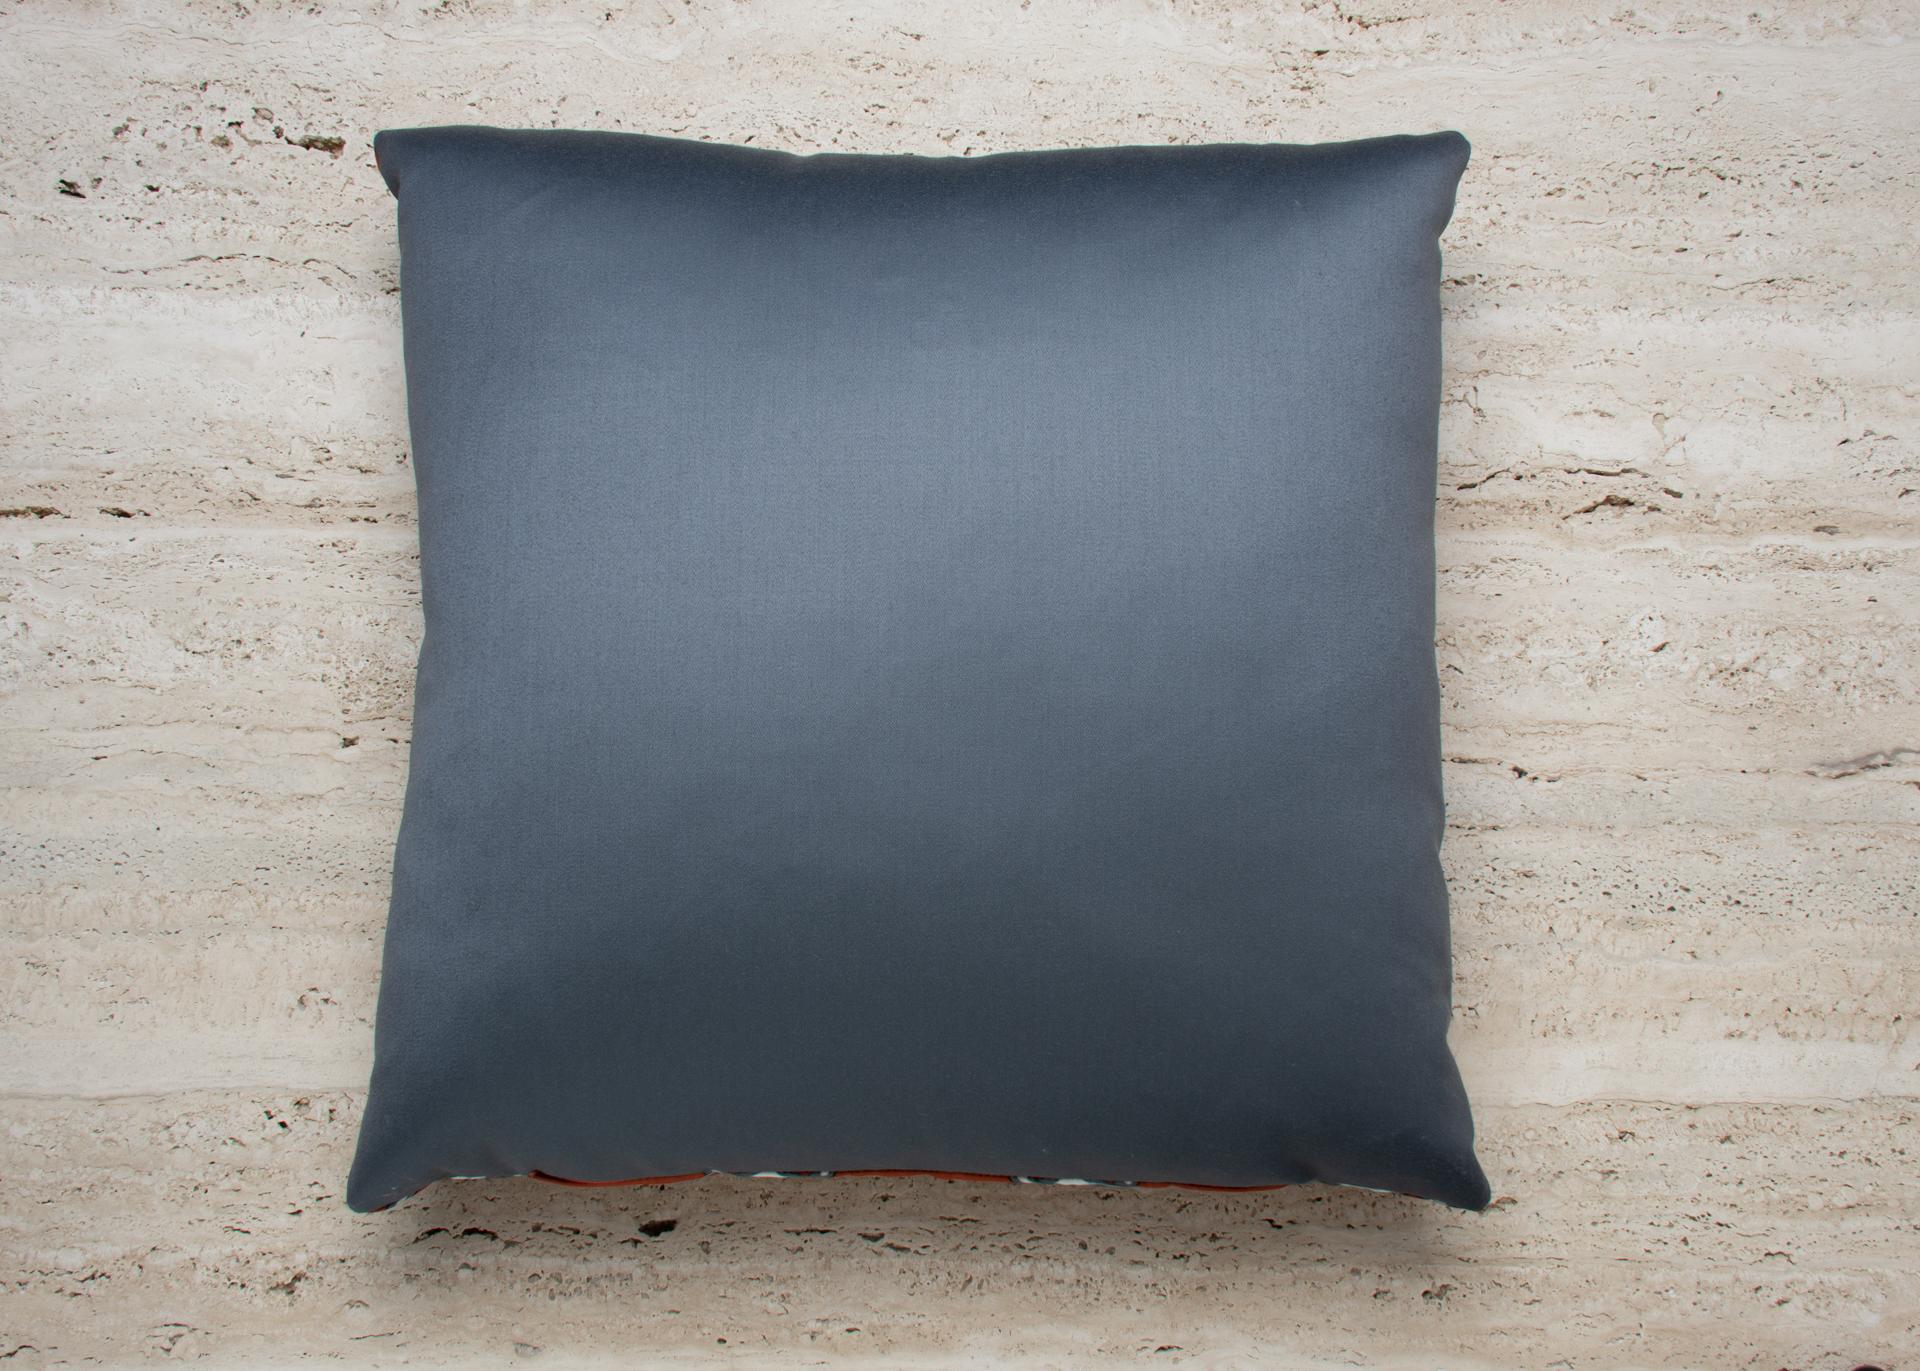 Introducing the exquisite limited edition Hermes Fabric Fil D'Argent, a truly exceptional piece that encapsulates the essence of luxury, craftsmanship, and timeless beauty. Meticulously handcrafted using discontinued Hermes fabrics, these pillows